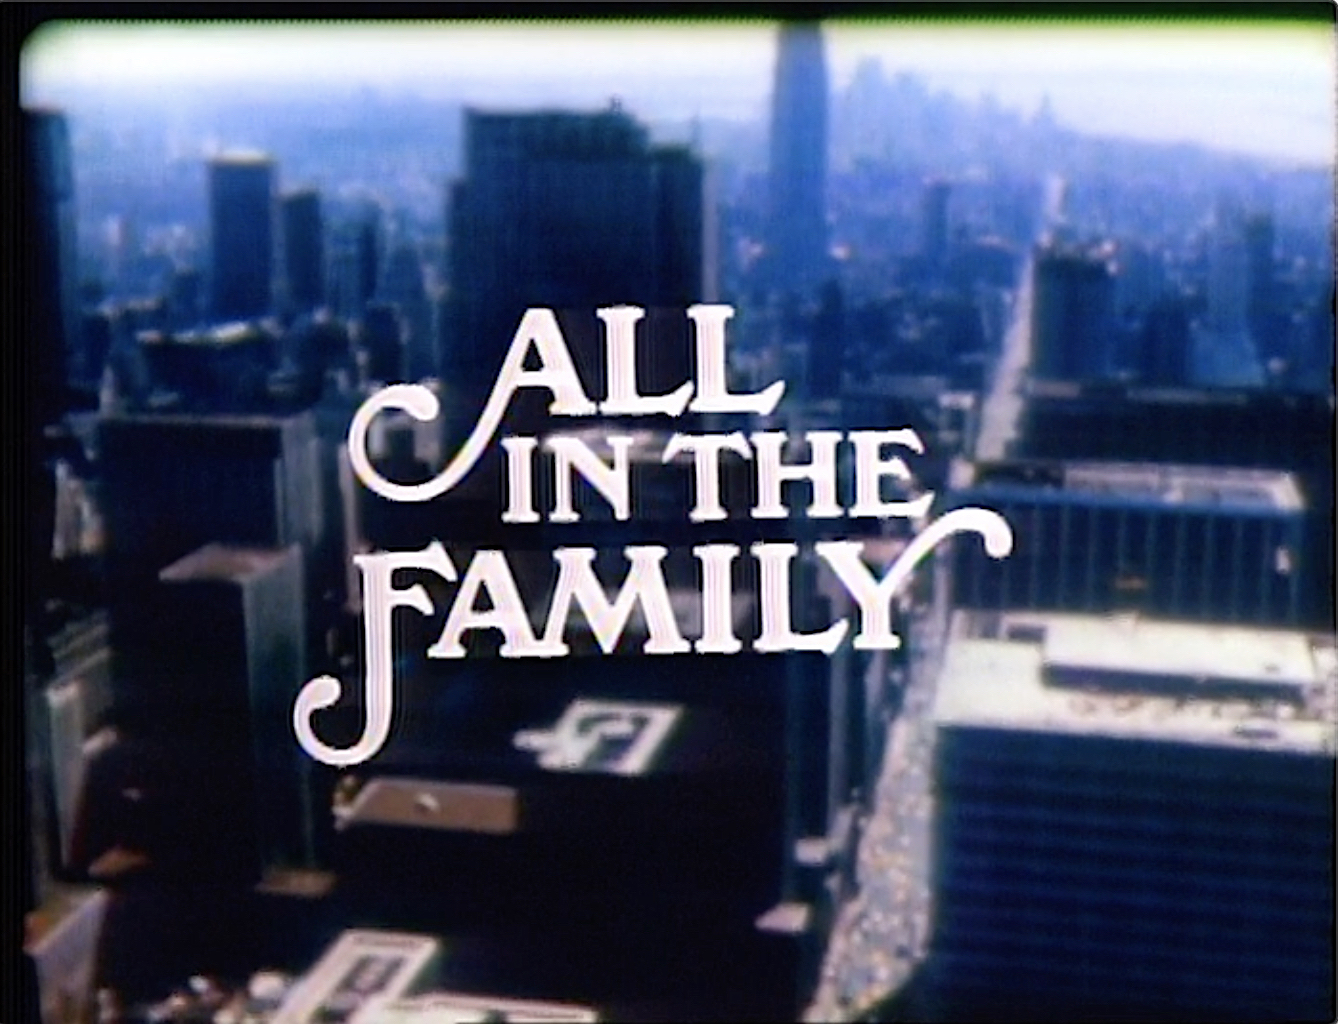 all-in-the-family-s05e23-no-smoking-mar-01-1975-2-jpg.192636